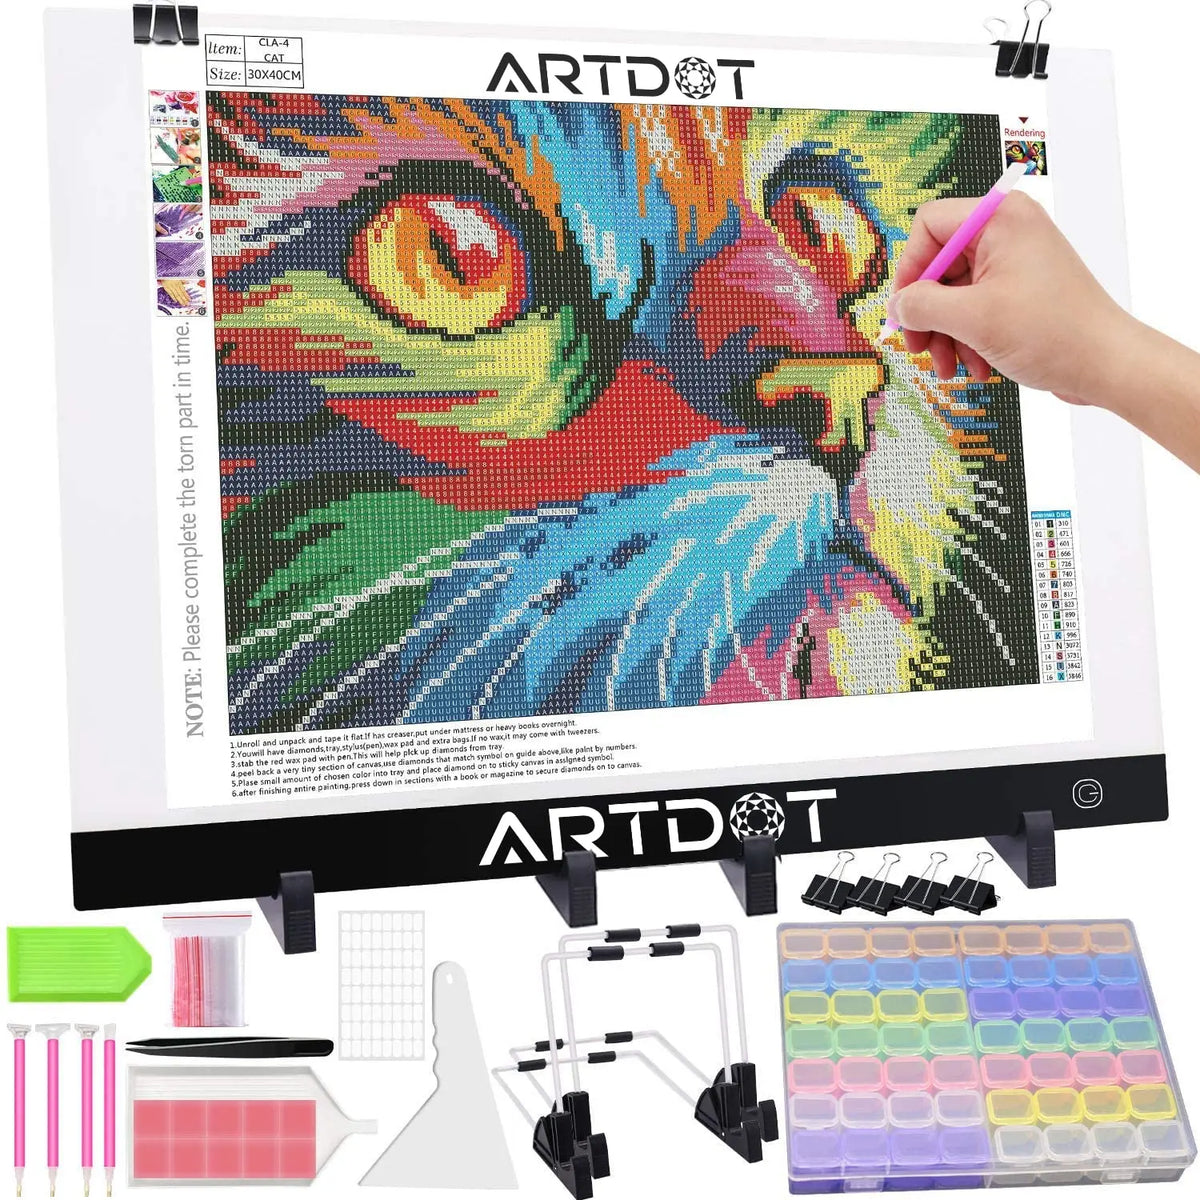 avpdupu 5d Diamond Painting Accessories and Tools, Diamond Art Accessories  Kits Help You Complete Your Diamond Painting Masterpiece More